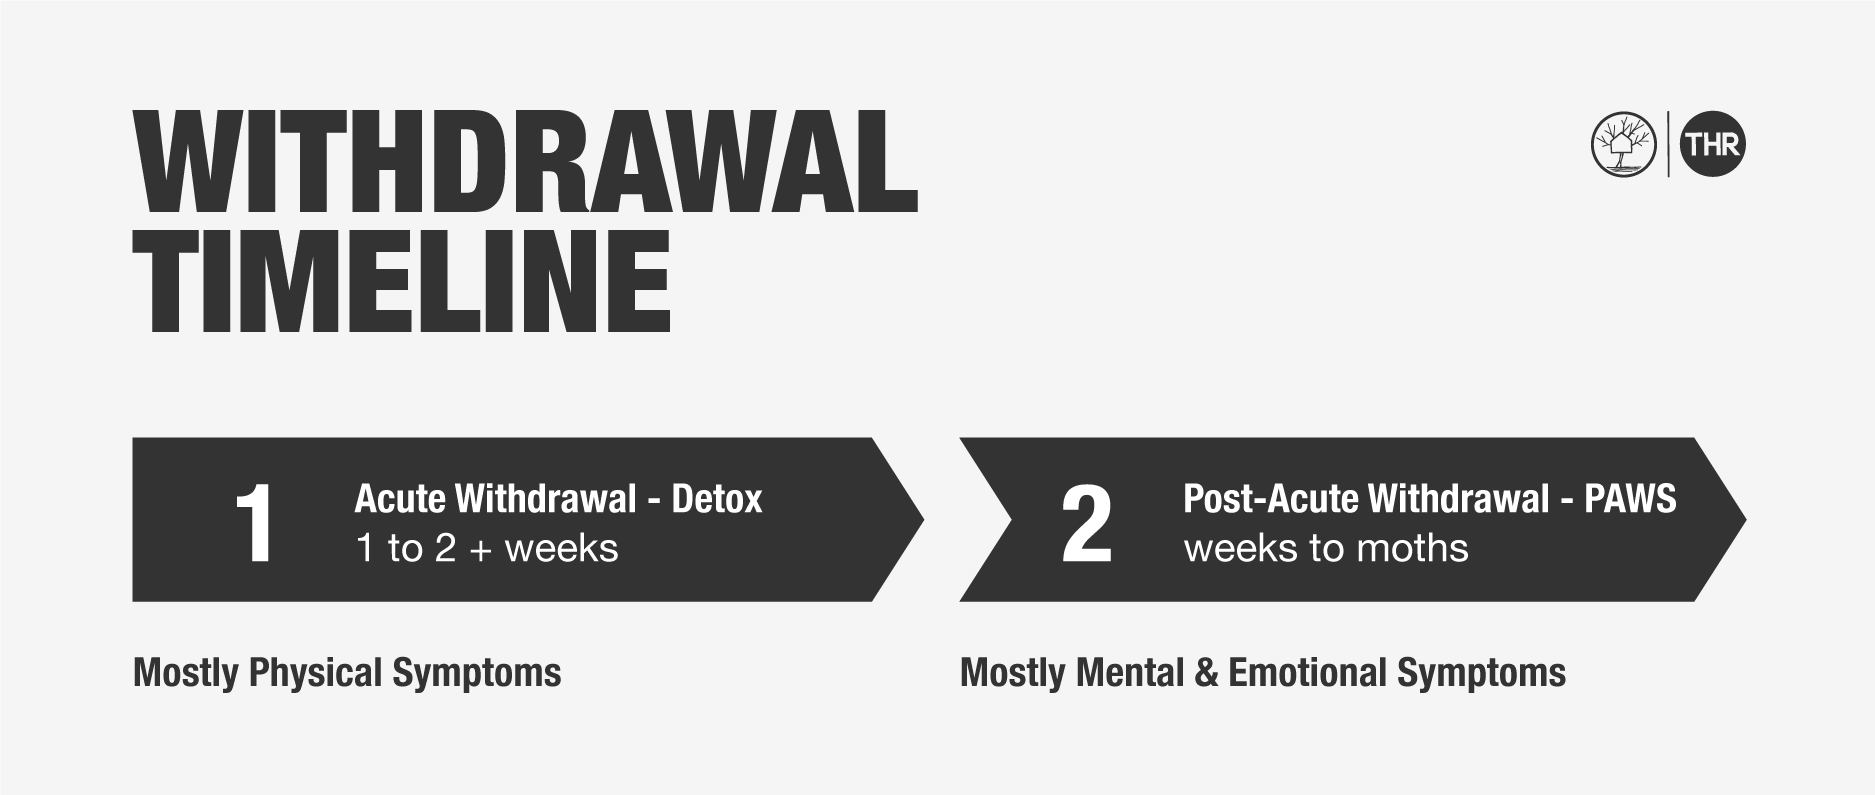 Illusion of withdrawal timeline: Detox lasting one to two weeks and post-acute withdrawal lasting weeks to months.